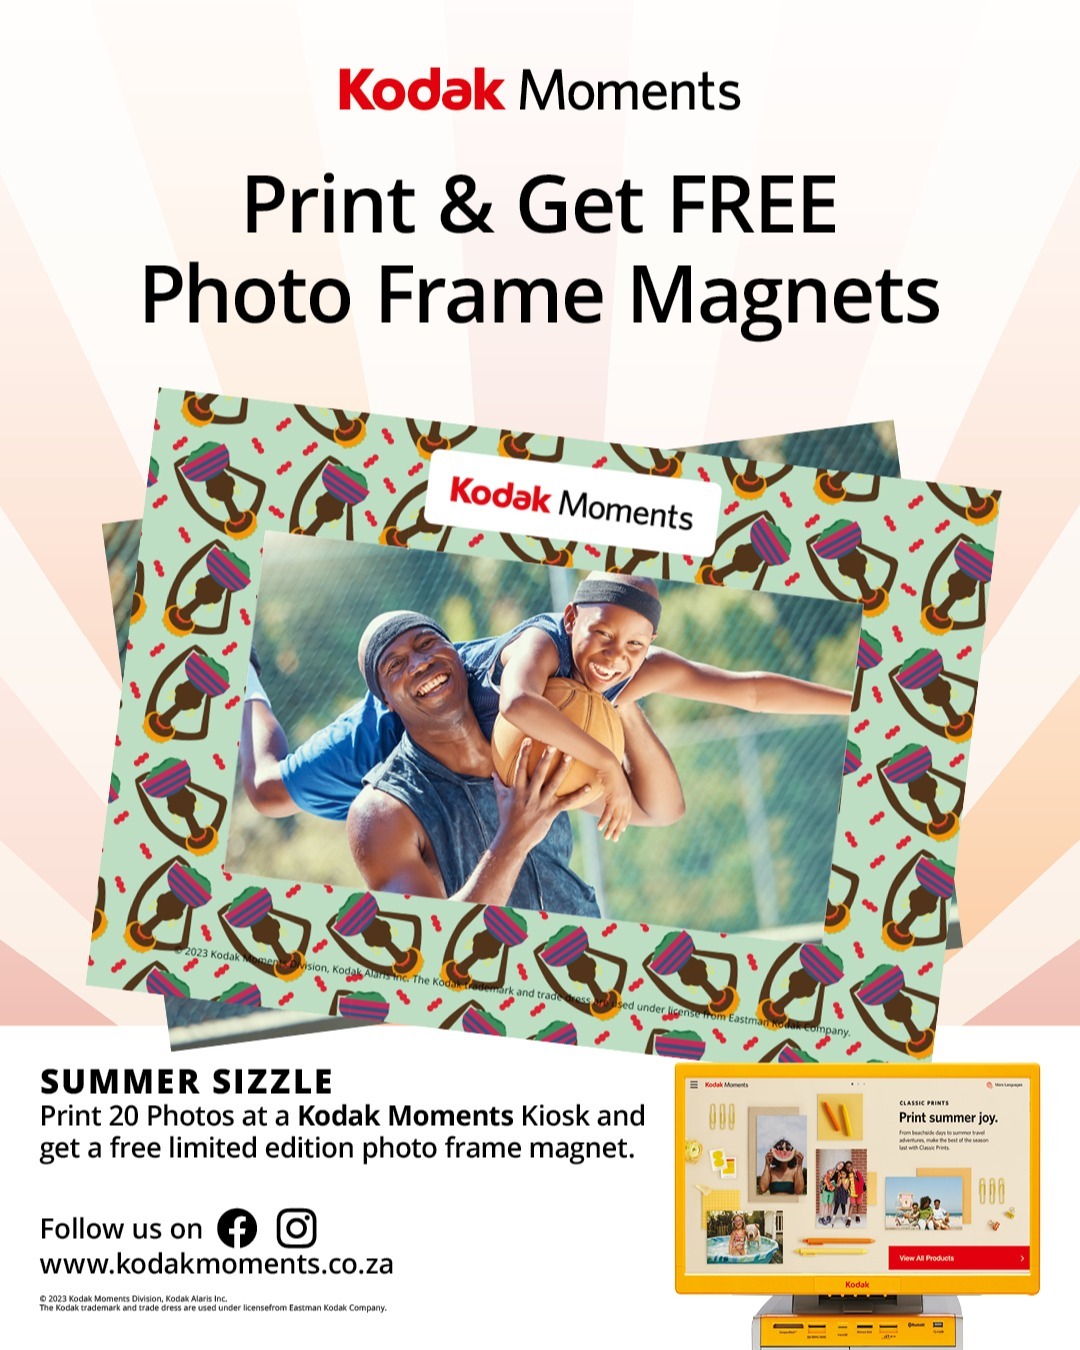 📸 Print & Preserve! 🌟 Print 20 Photos at a Kodak Moments Kiosk and claim your FREE Photo Frame Magnet – a limited edition gem for your cherished memories! 🖼️✨ #PrintAndGet #KodakMoments #MagnetMagic 📷🎁🖼️🌠🤳

How to enter: 
➡️ Print 20 prints at a Kodak Moments kiosk and receive your magnet directly at the store.

📍 Find your nearest KODAK MOMENTS kiosk easily on our website: https://www.kodakmoments.co.za/kiosk-locator

ℹ️ T&C’s apply. Ask staff for more details. 

We keep our fingers crossed for you! 🤞

#kodakmoments #kodakkiosk #kodakmomentsza
#prints #photography #gifts #personalizedgifts #printonkodak